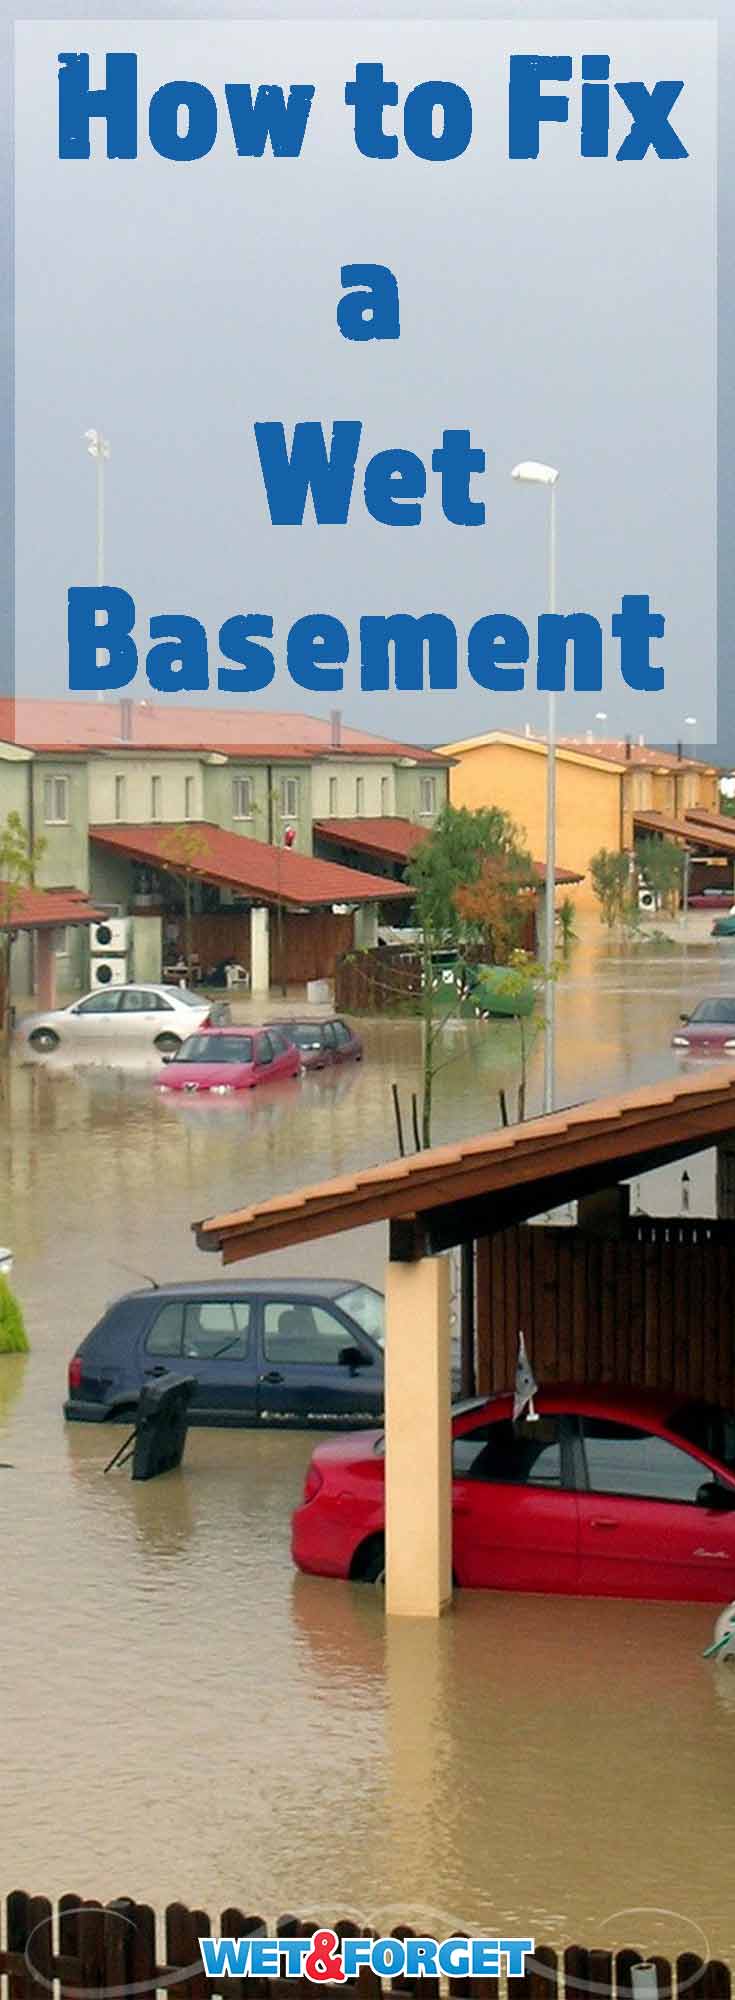 A flooded or wet basement can lead to many issues in your home. Learn how to fix a wet basement with these 4 simple steps!